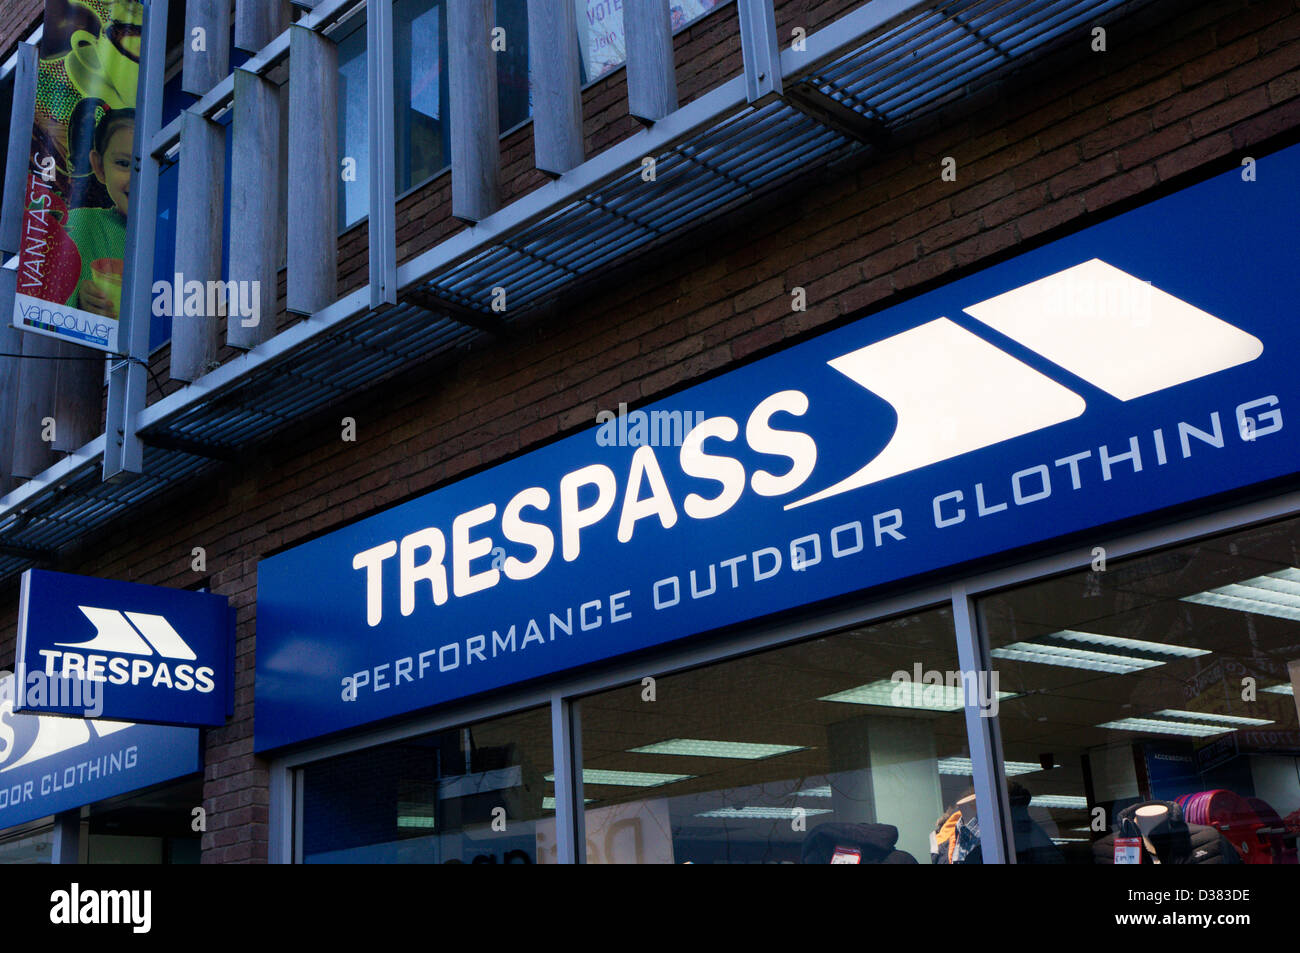 Sign on Trespass shop selling performance outdoor clothing. Stock Photo